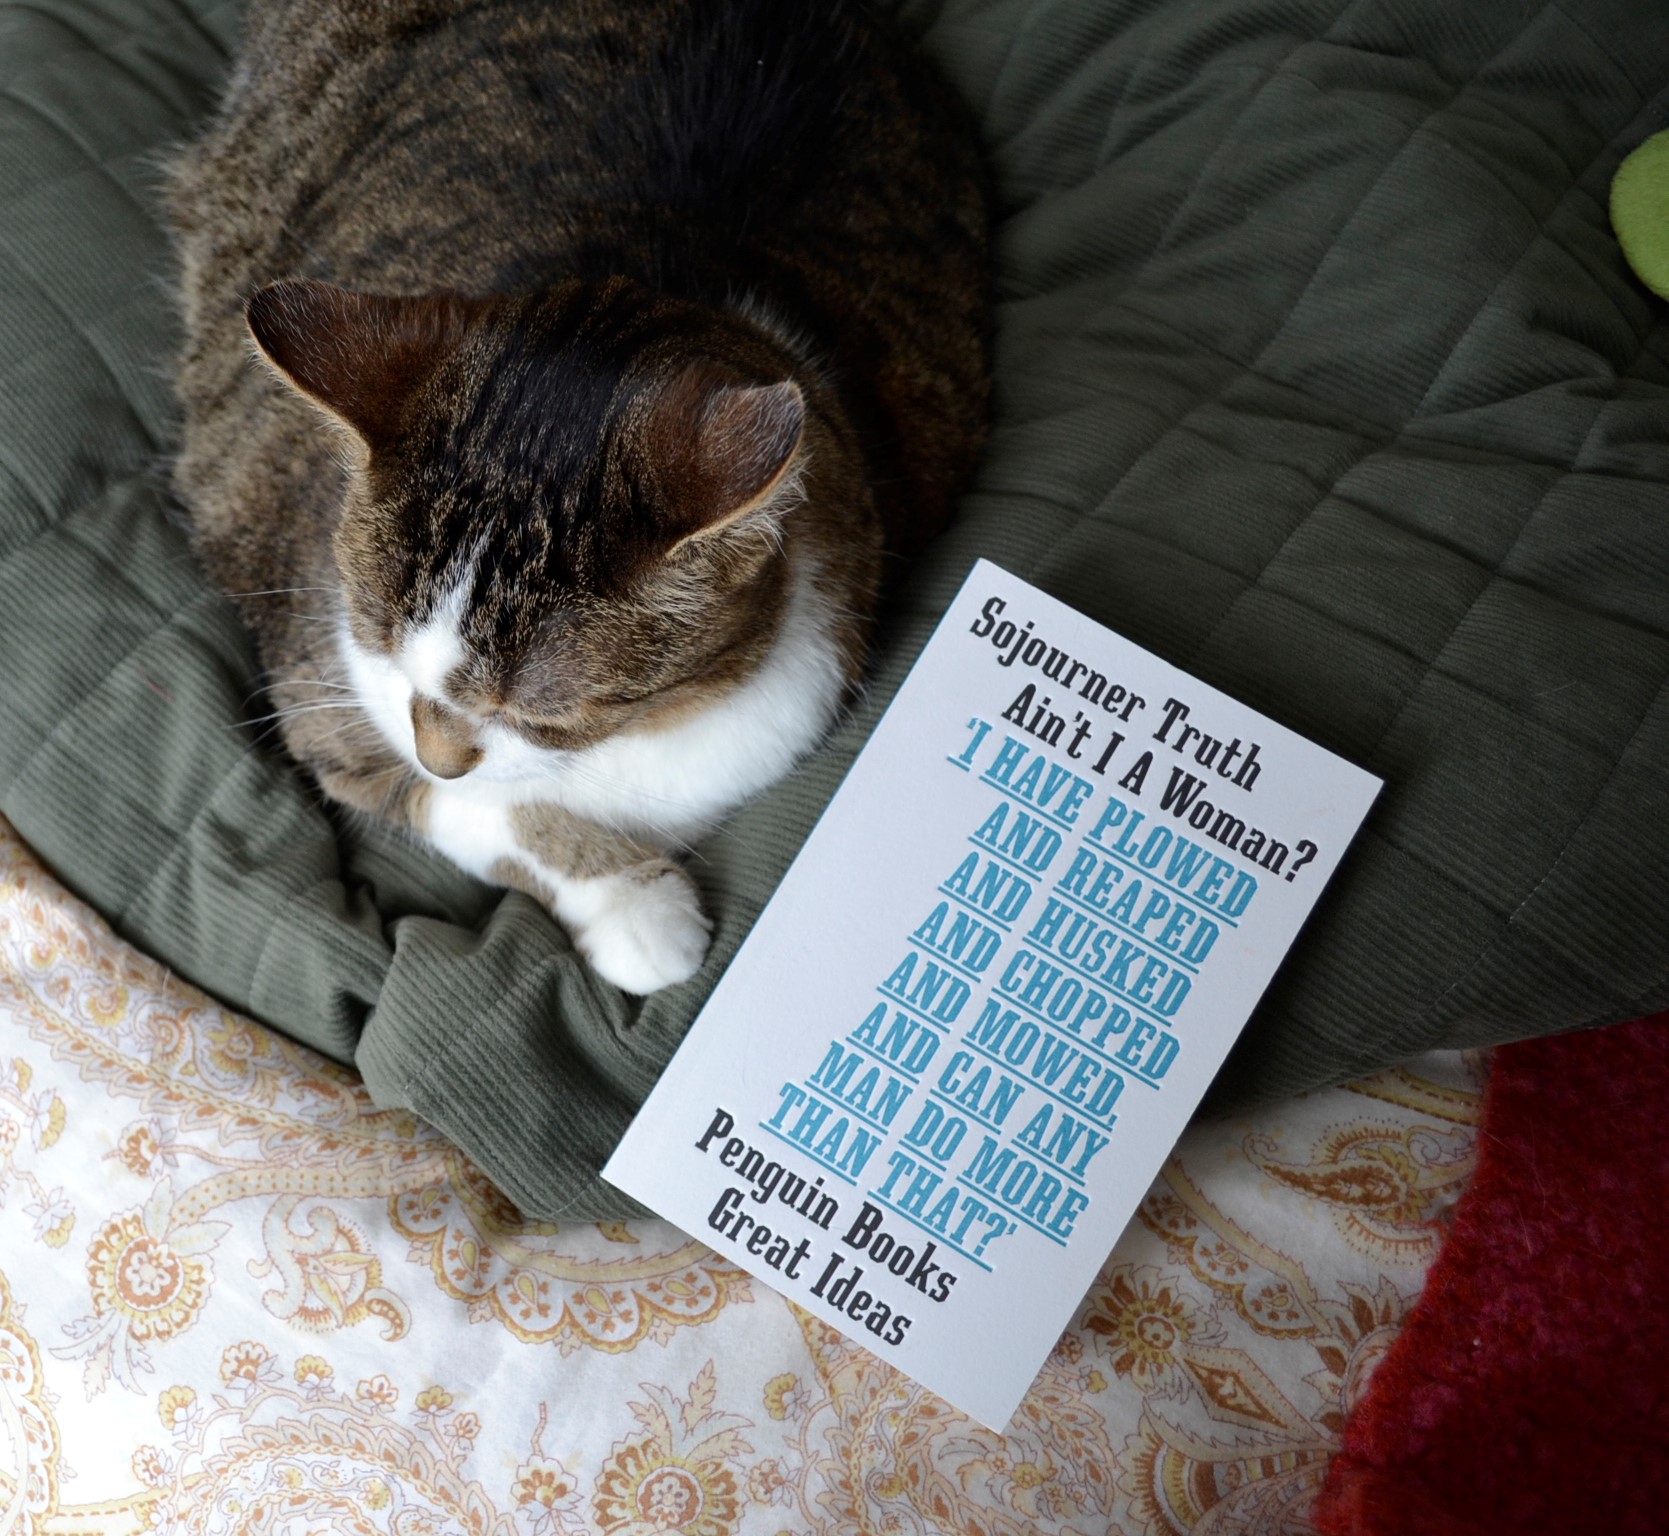 A tabby fold ups her paws beside a white book. The book is plain with text on the cover.